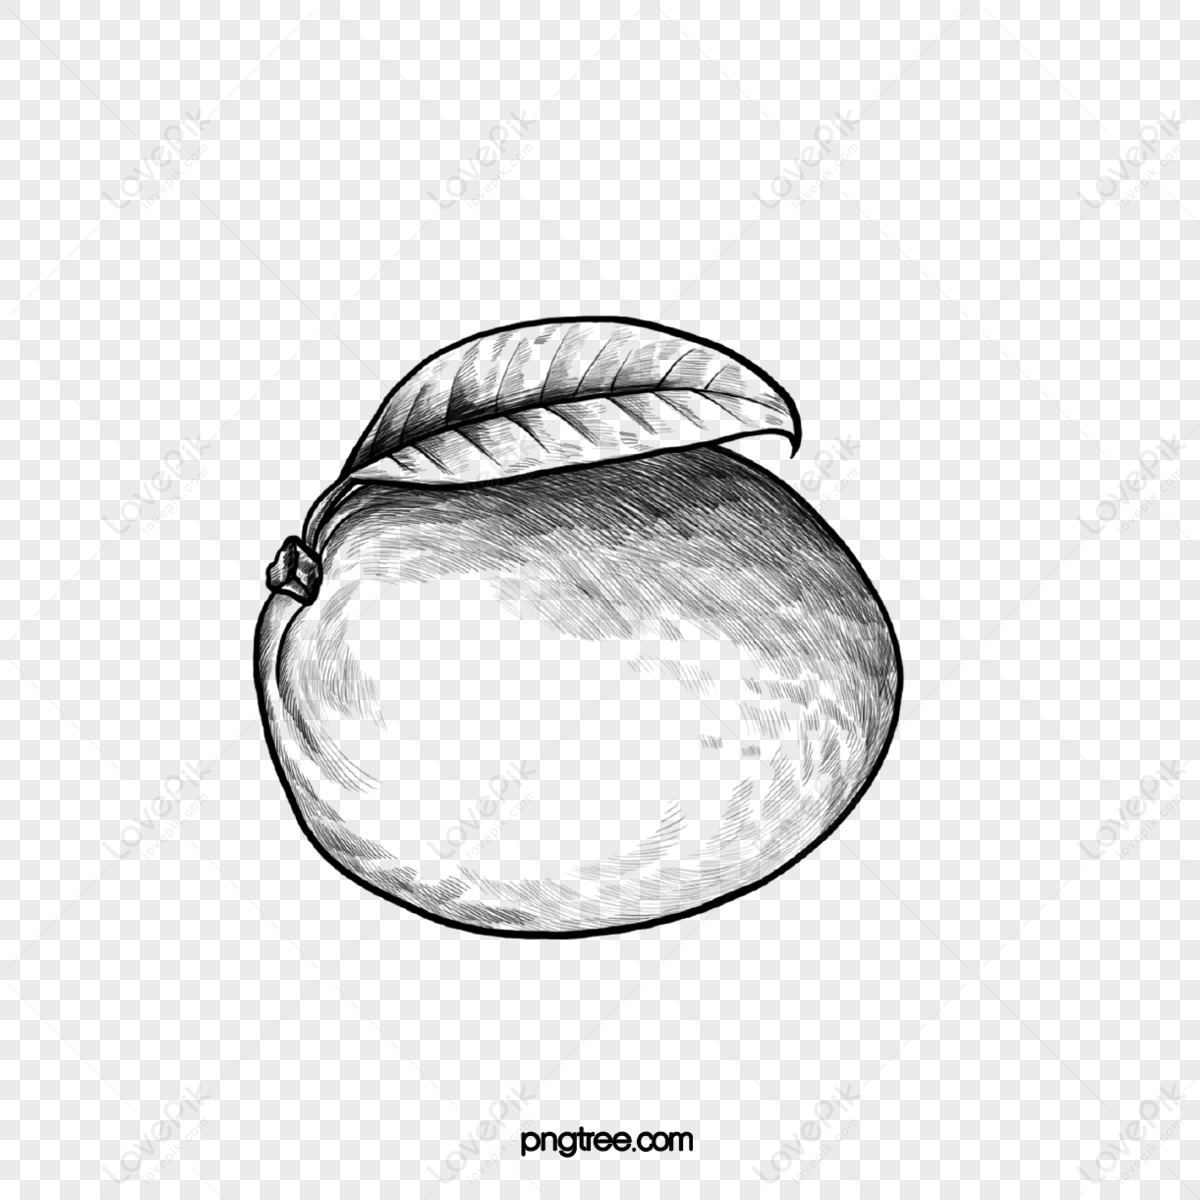 Line drawing of mango -simple Royalty Free Vector Image